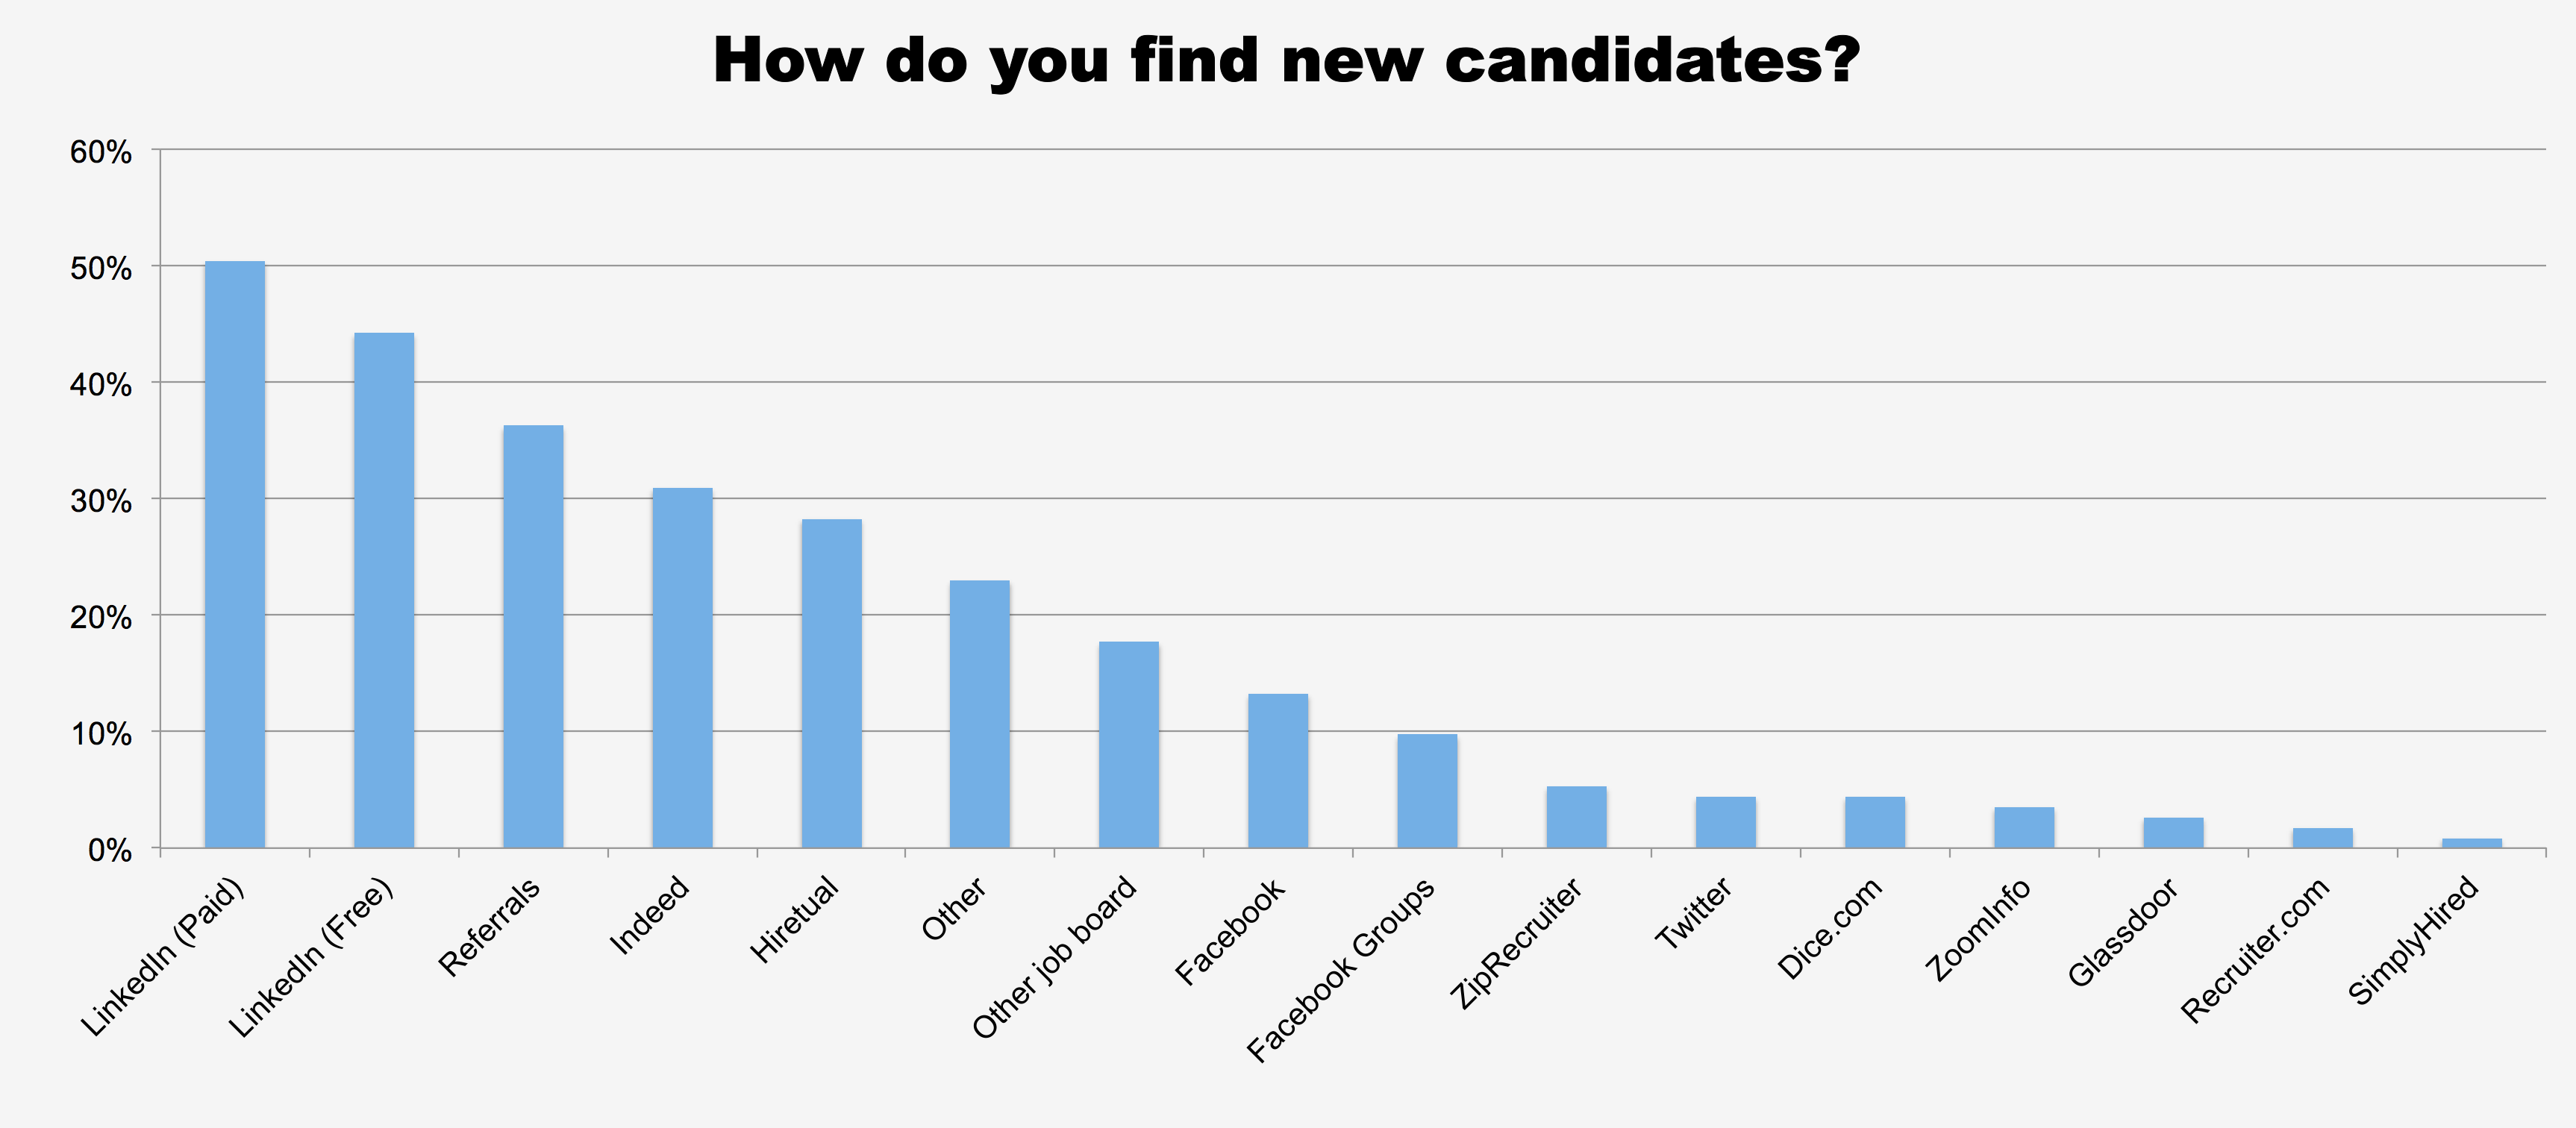 How do you find new candidates?